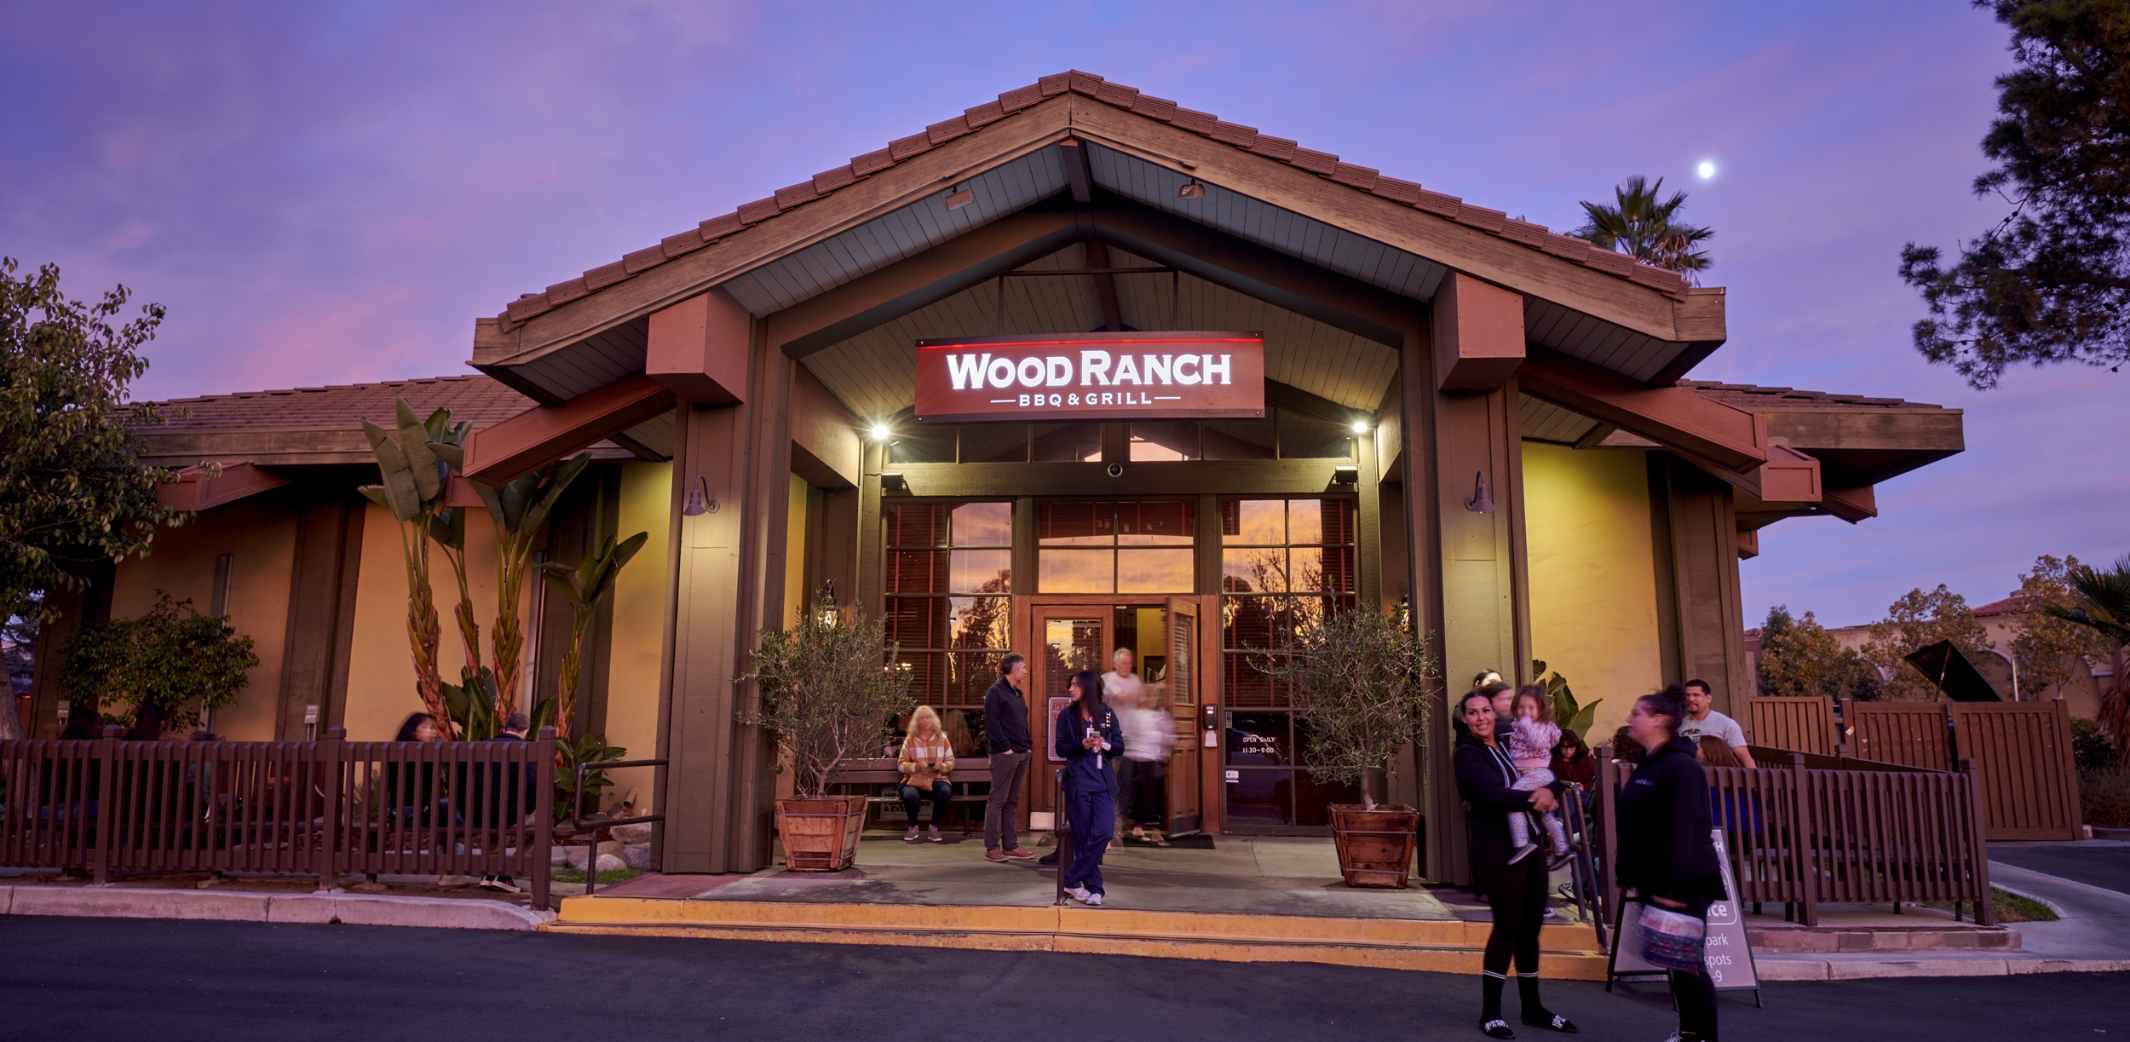 Twilight view of the Wood Ranch BBQ & Grill Moorpark entrance, with guests milling about, highlighted by the restaurant's warm lighting and welcoming signage.